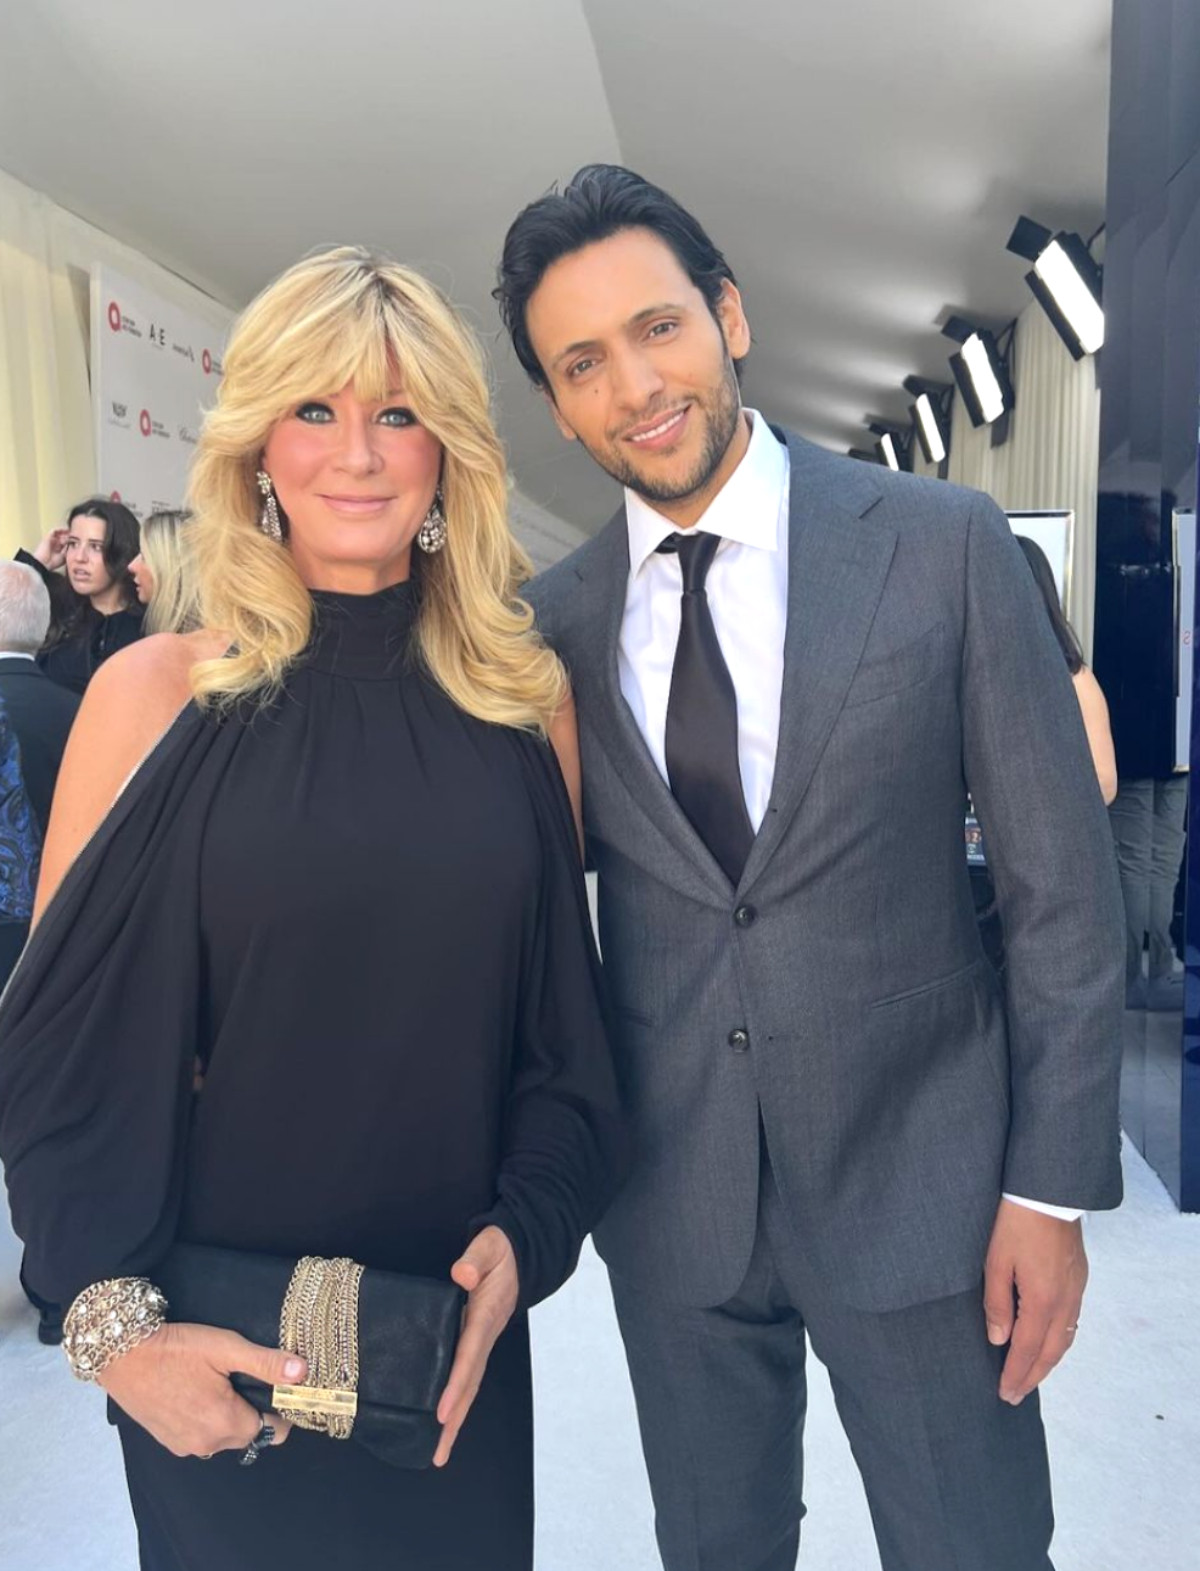 TV chef Sandra Lee and her partner Ben Youcef attended a handful of Oscars parties together last week. Photo: @sandraleeonline/Instagram 